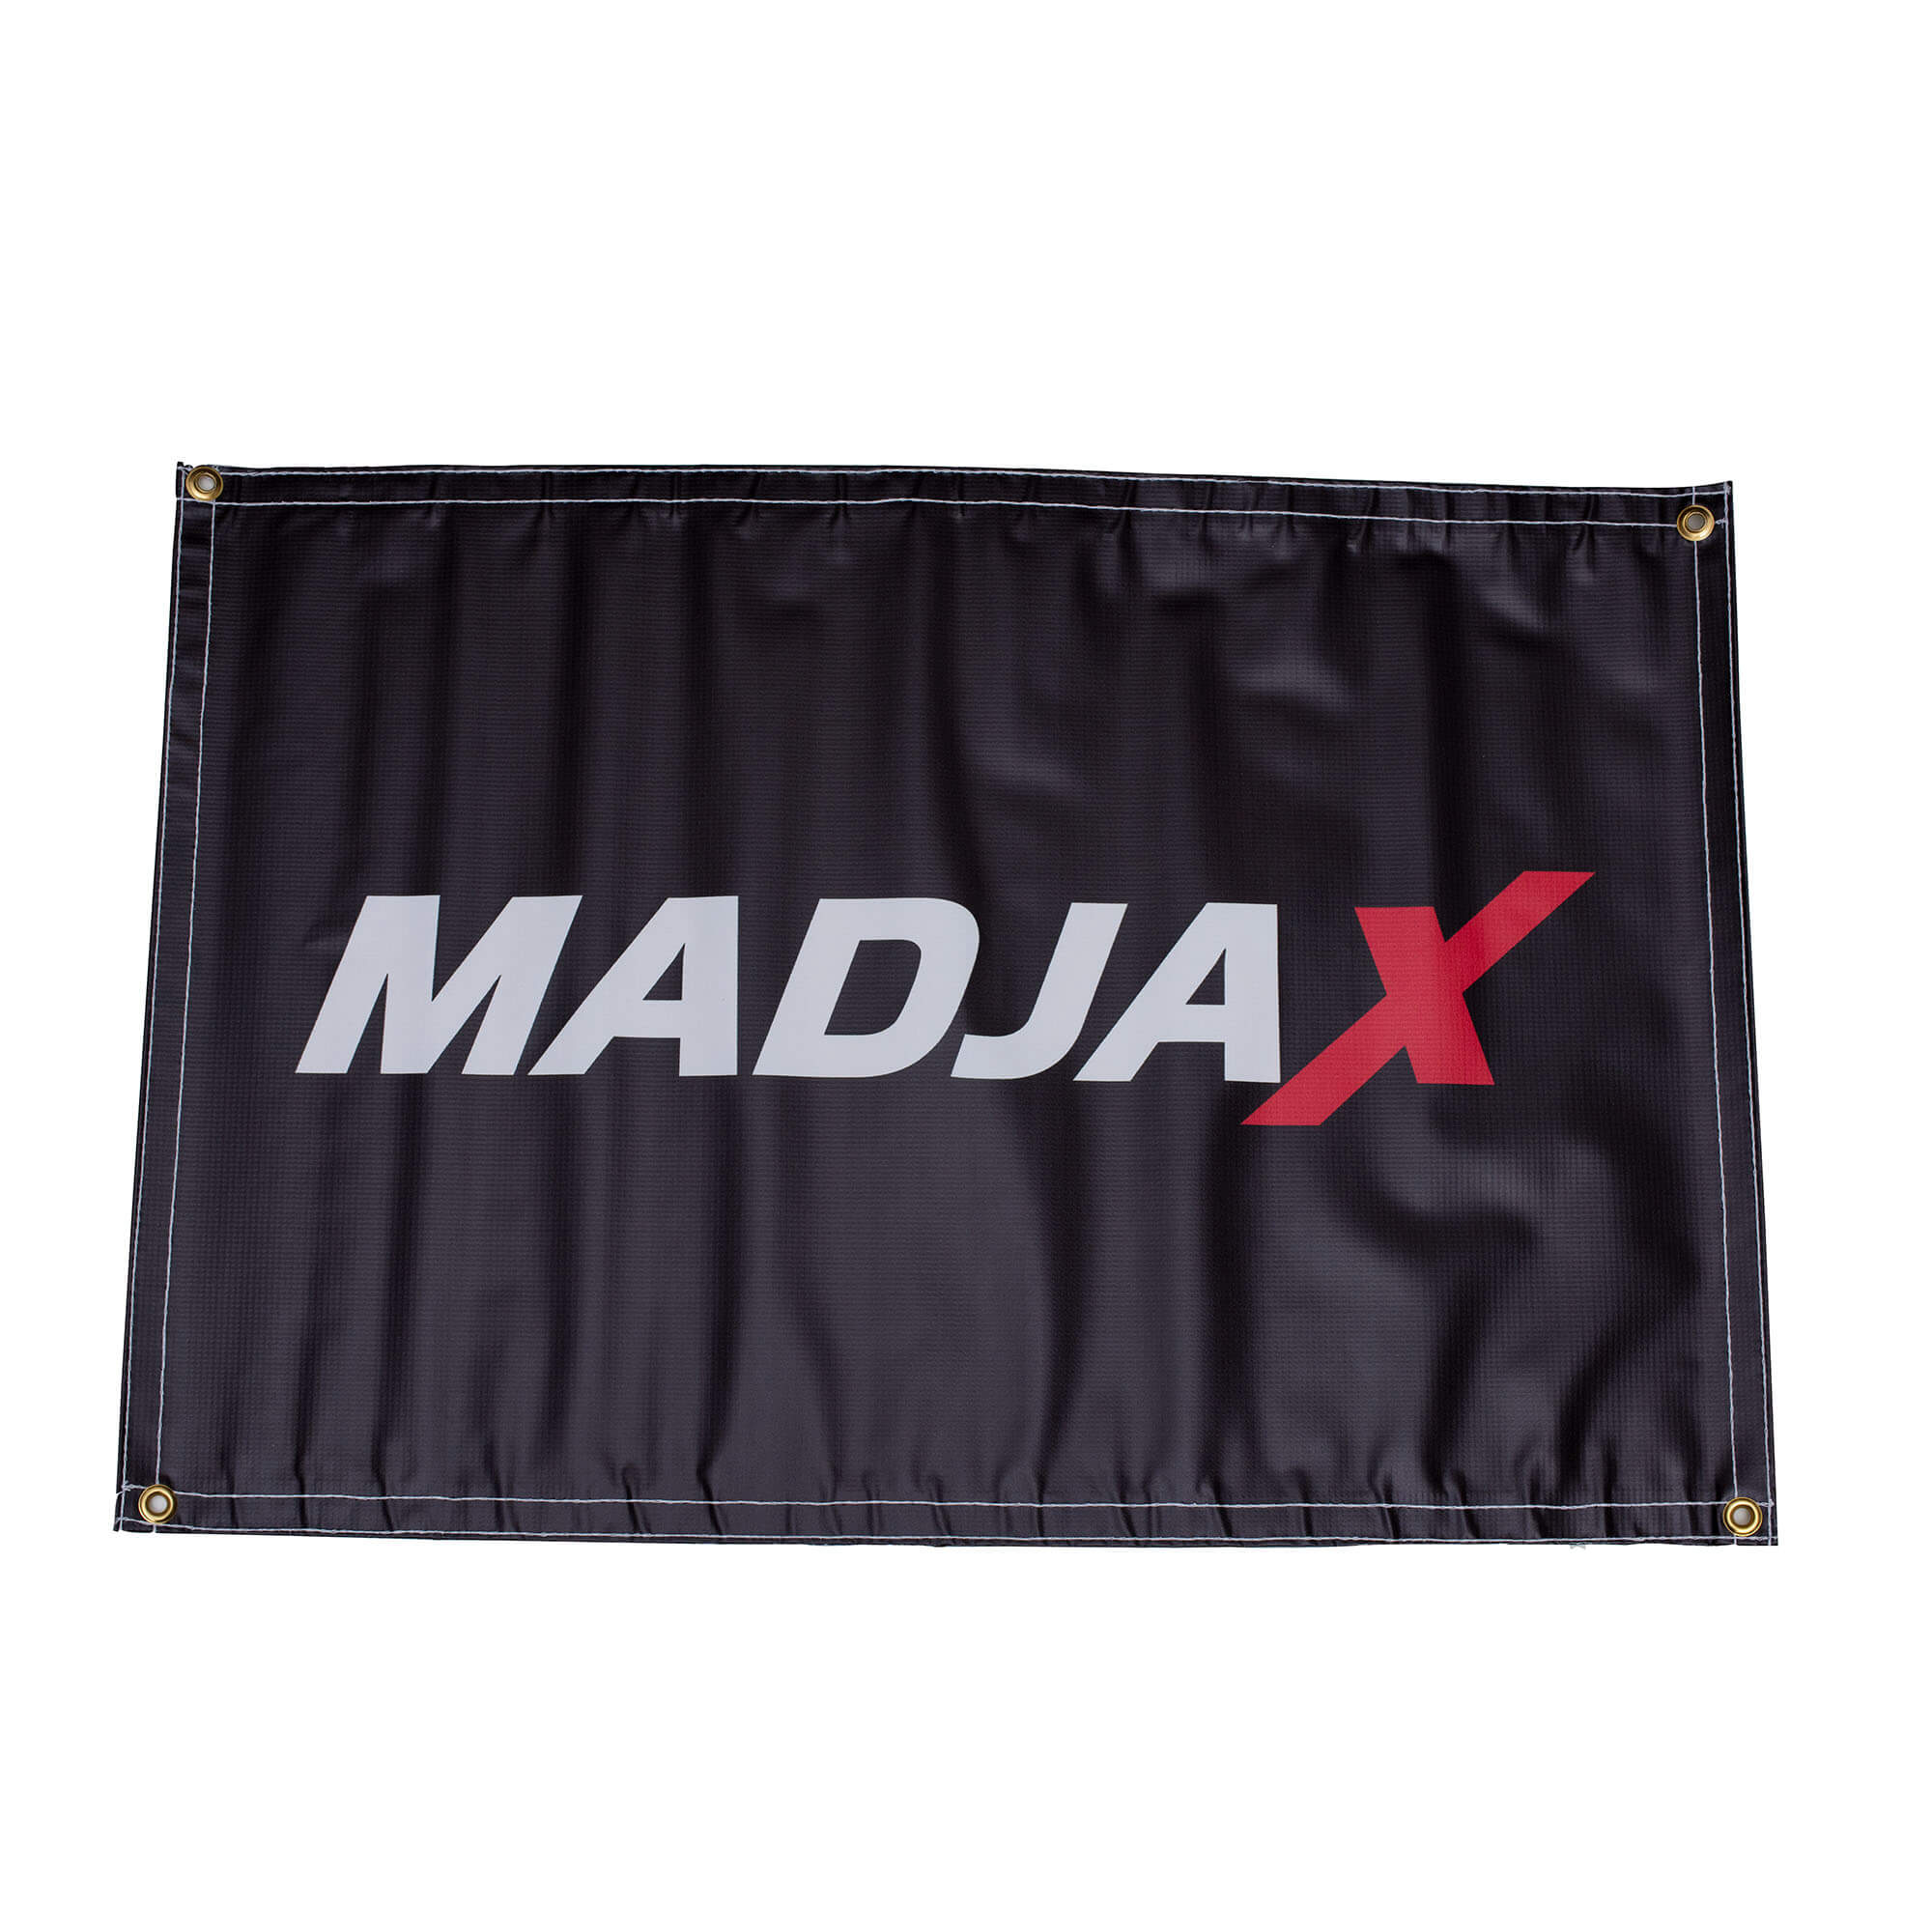 MadJax Black and Red X Banner